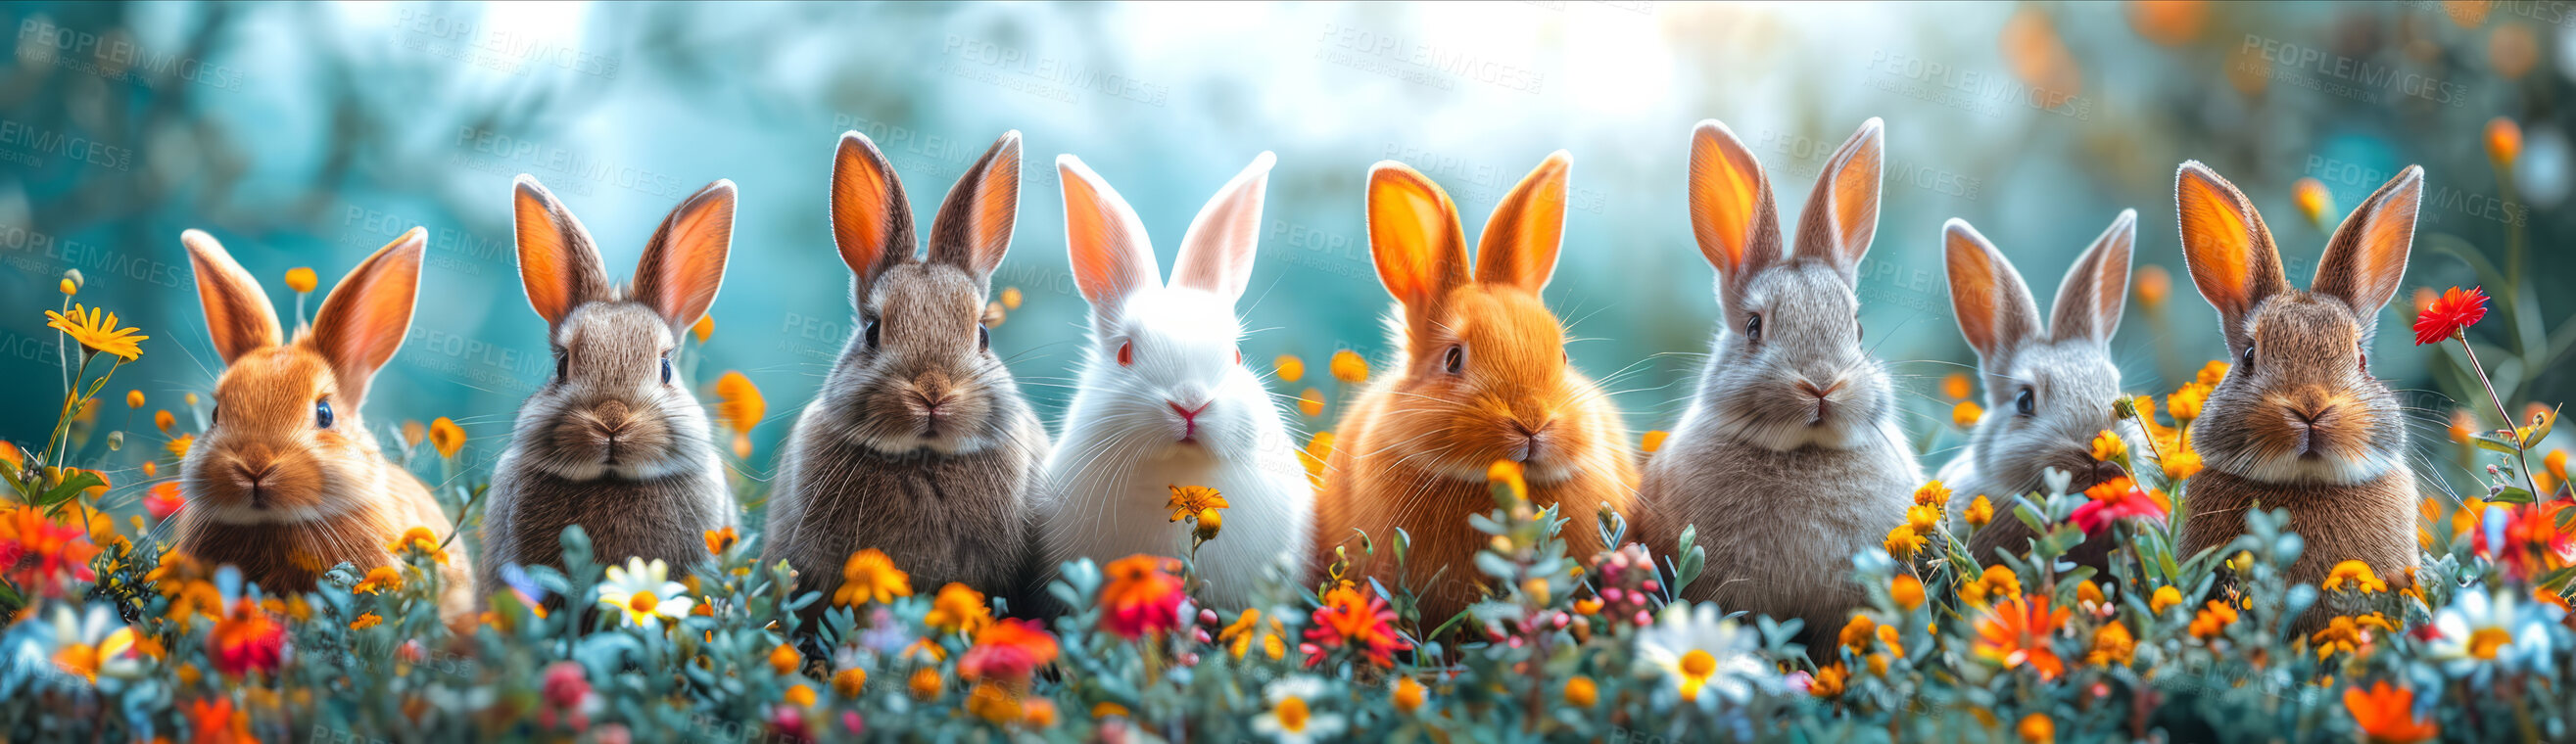 Buy stock photo Background, celebration and bunny for holiday, vacation and easter with color, chocolate and illustration. Flowers, banner and decoration in abstract for creative wallpaper, advertisement and art.